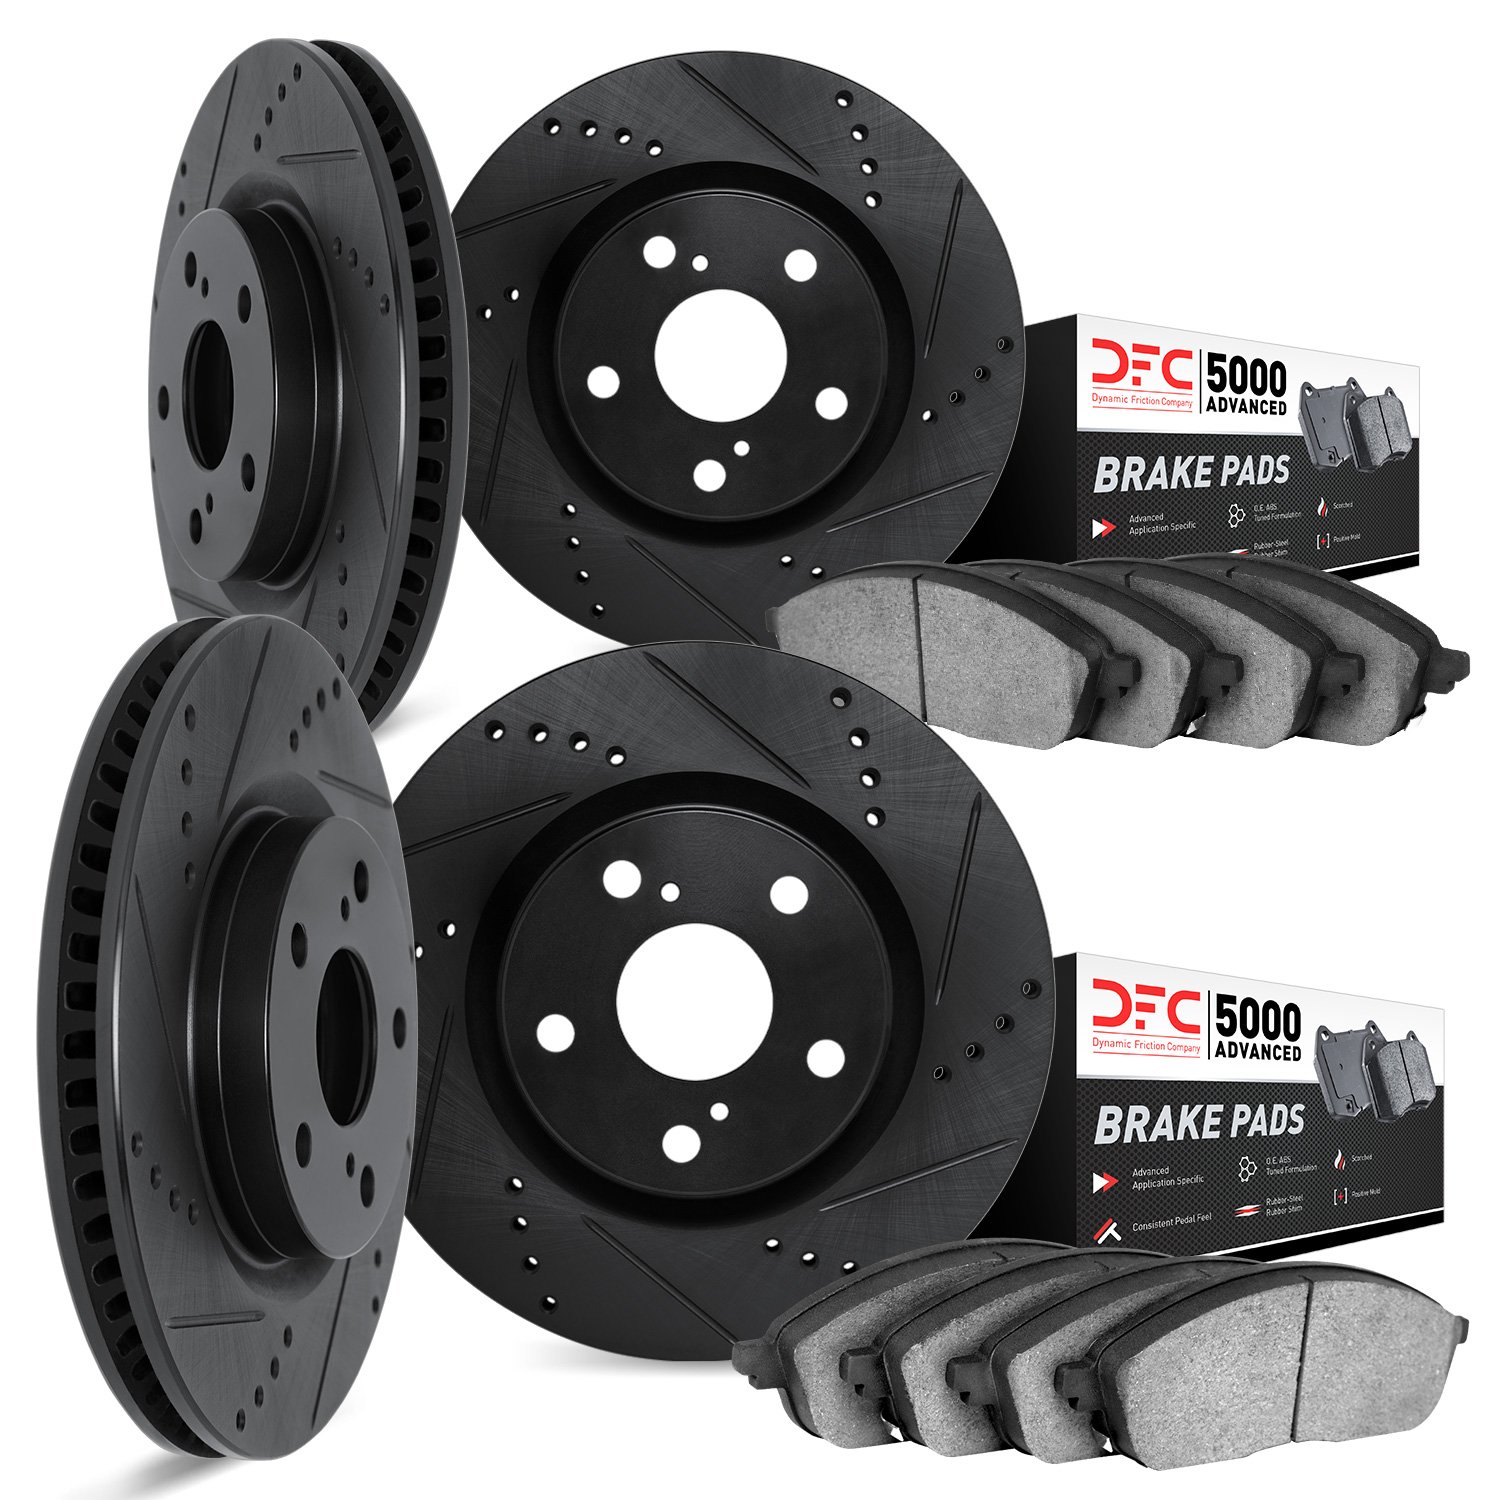 8504-13023 Drilled/Slotted Brake Rotors w/5000 Advanced Brake Pads Kit [Black], Fits Select Subaru, Position: Front and Rear